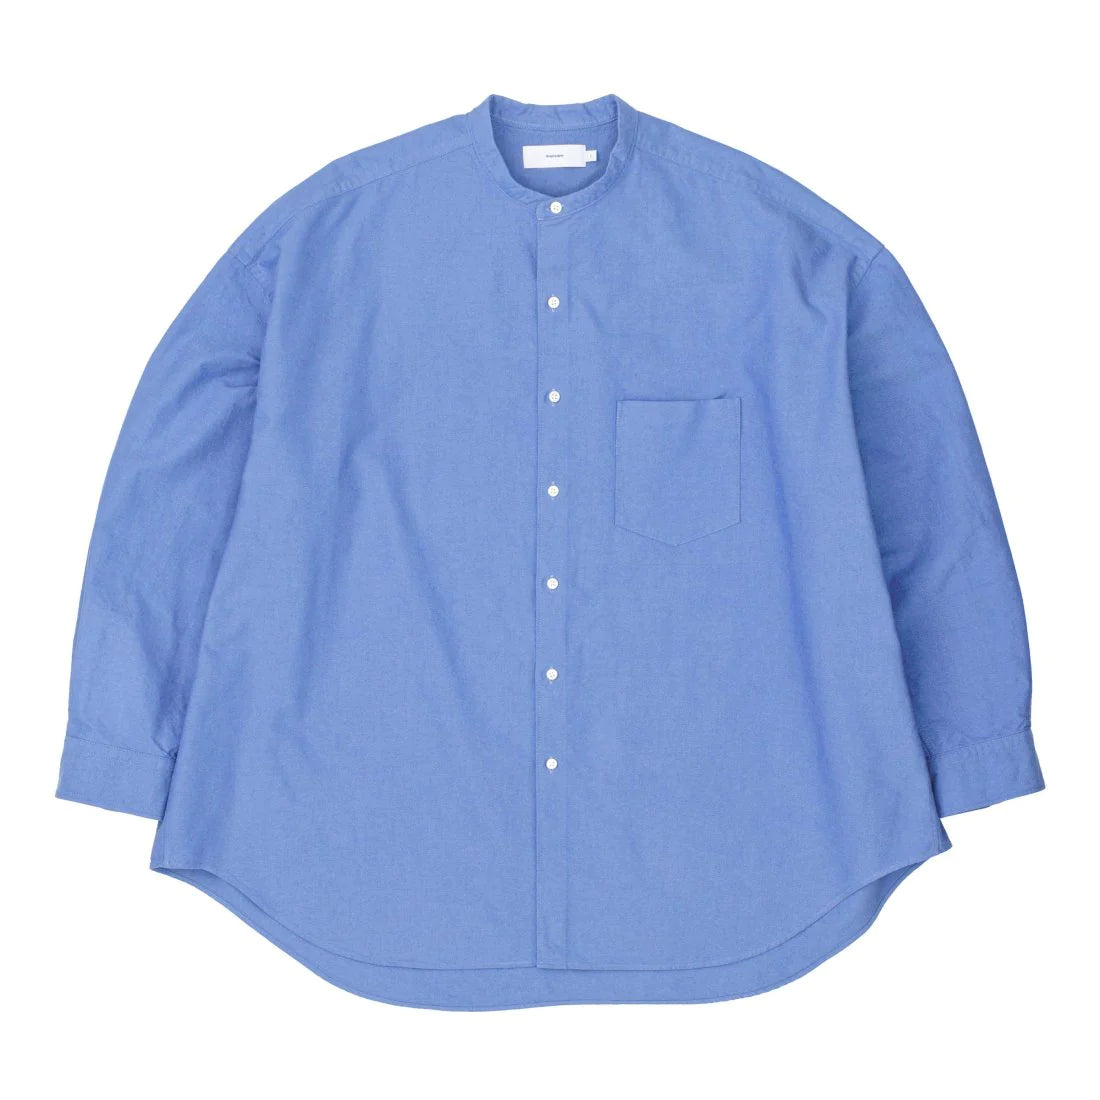 Graphpaper / Oxford Oversized  Band Collar Shirt